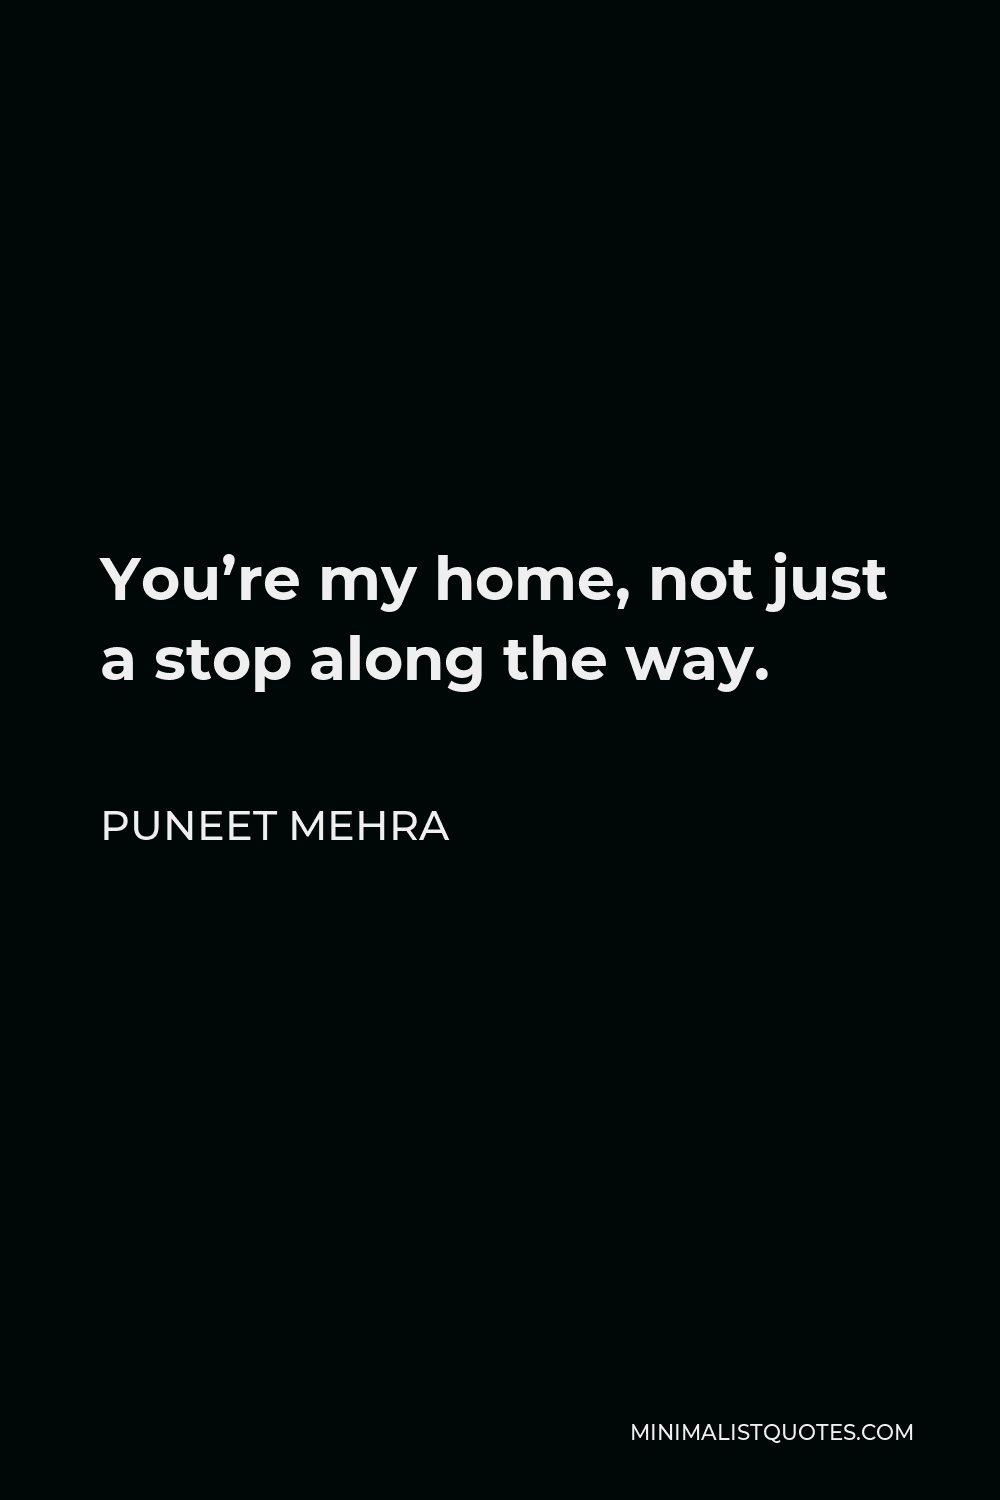 Puneet Mehra Quote - You’re my home, not just a stop along the way.